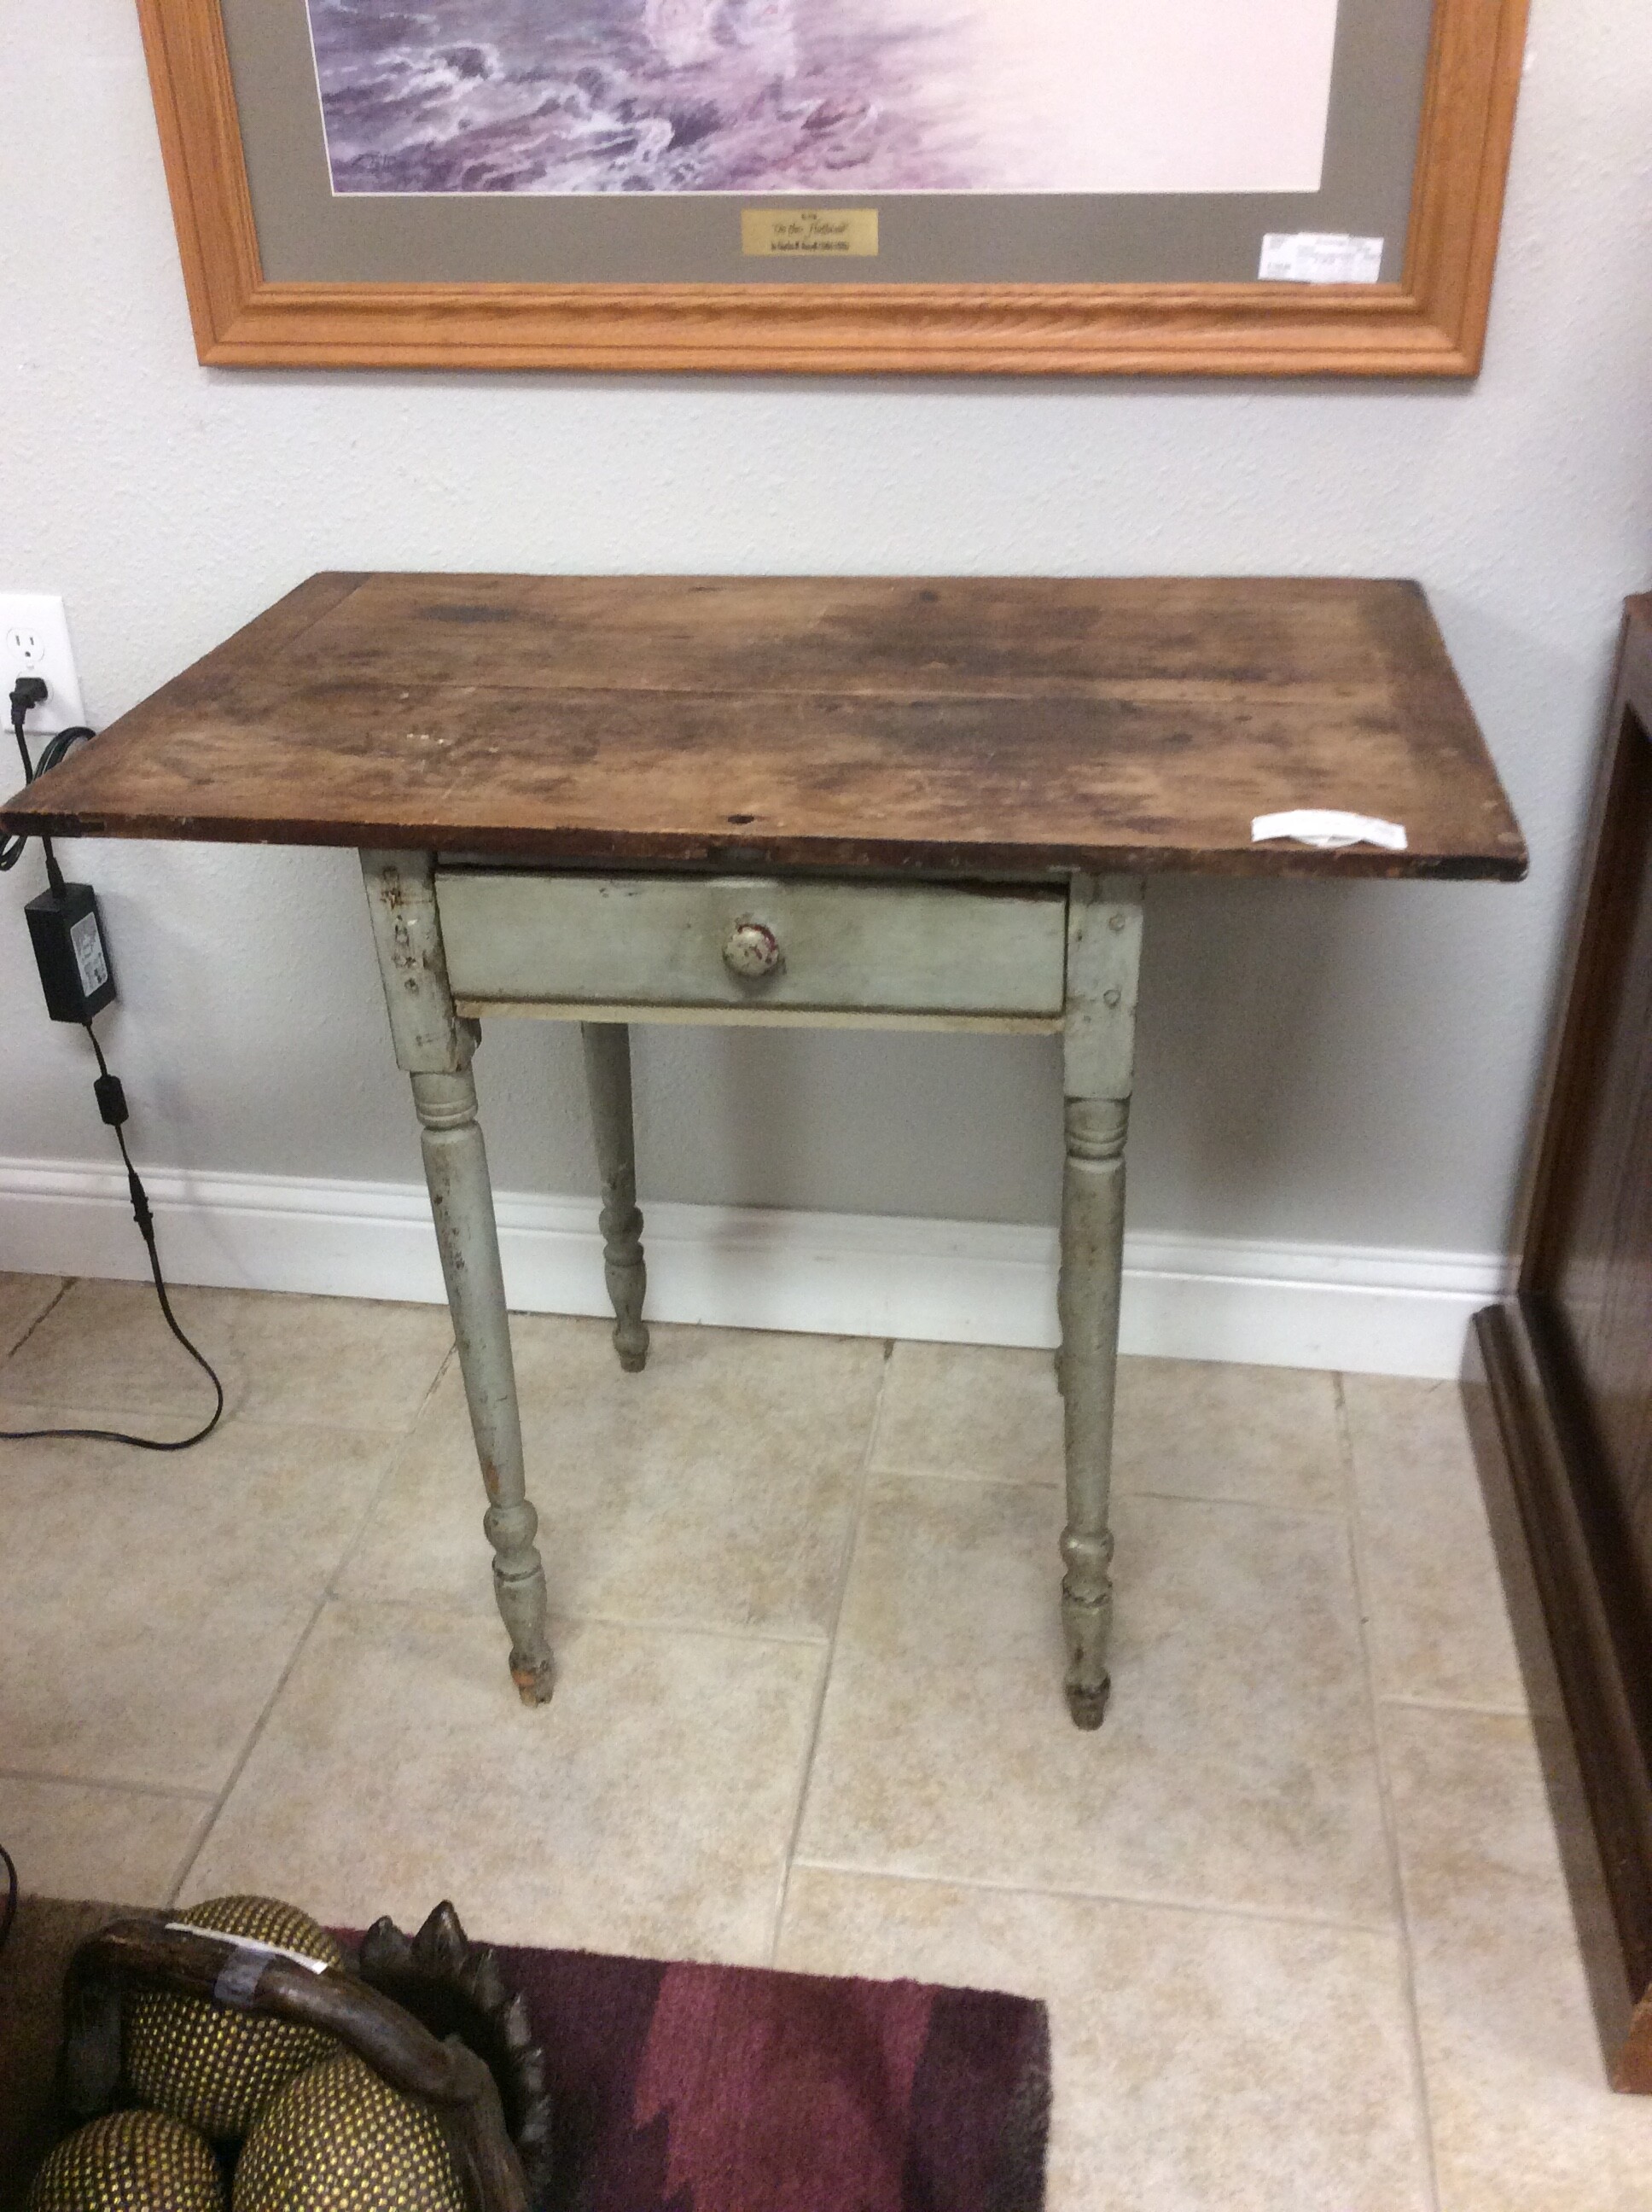 This charming rustic antique table has a center drawer and distressed painted base. Could be used in multiple settings.